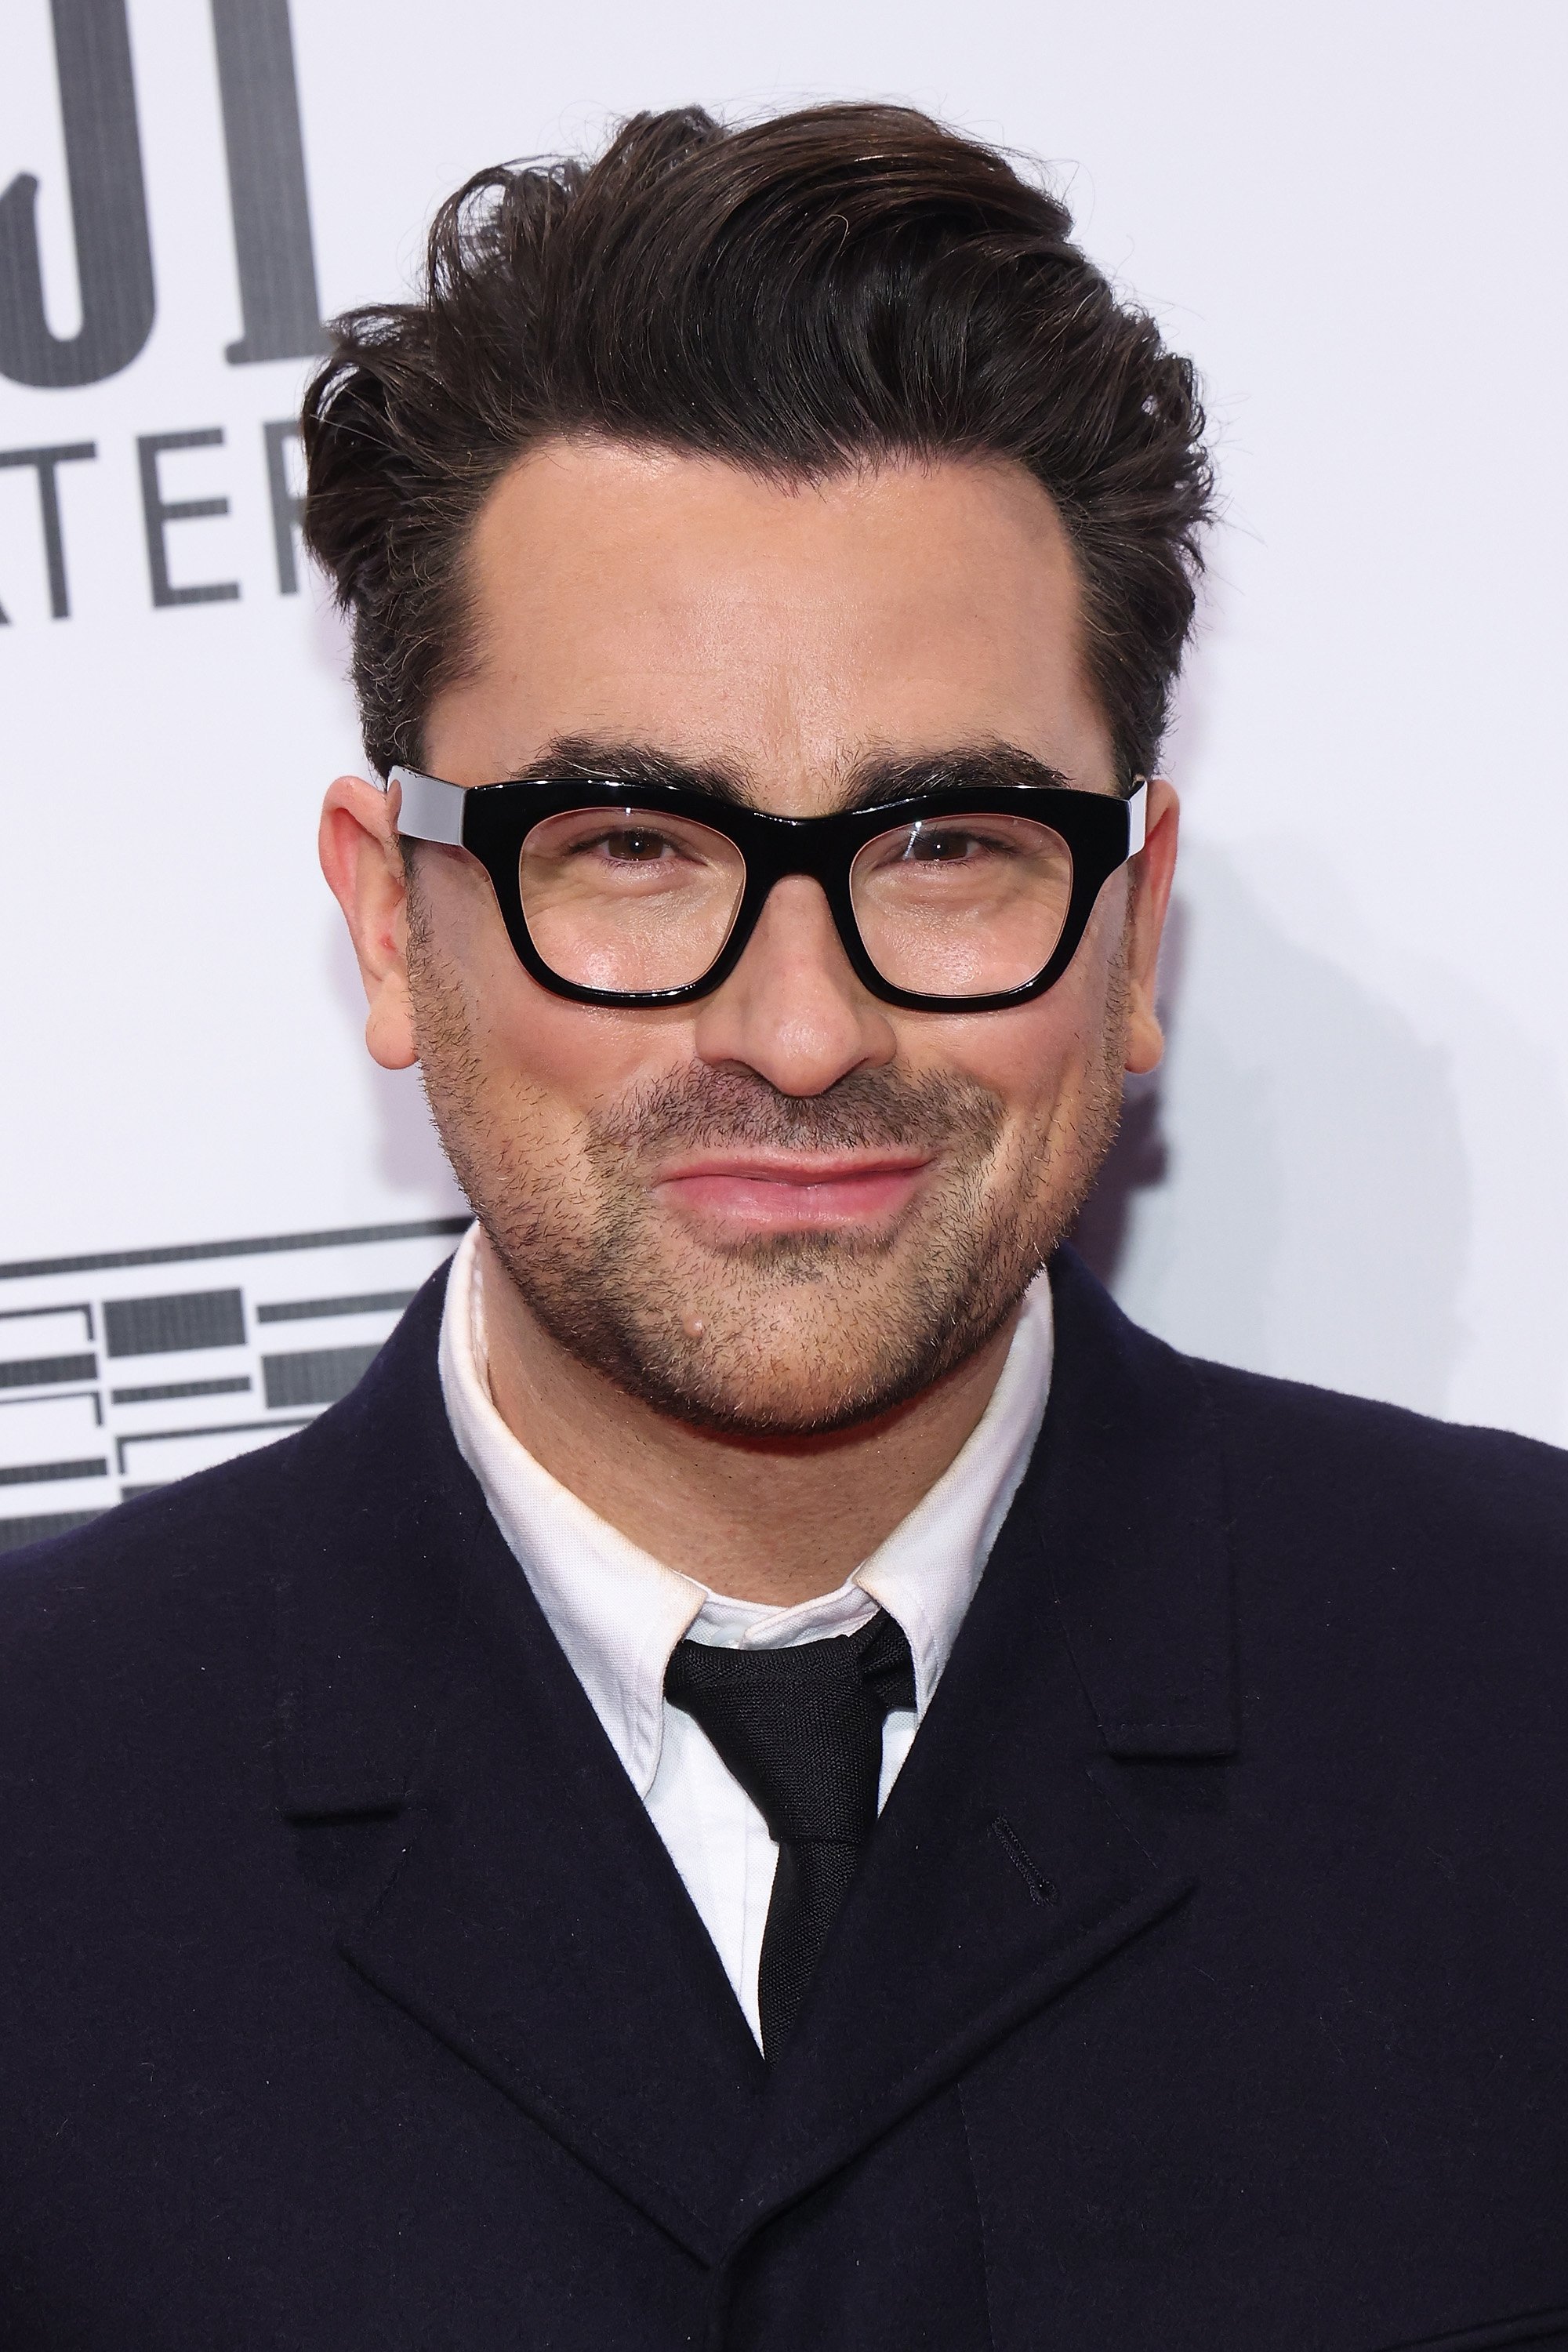 Dan Levy attends the 2021 Gotham Awards in New York City | Source: Getty Images